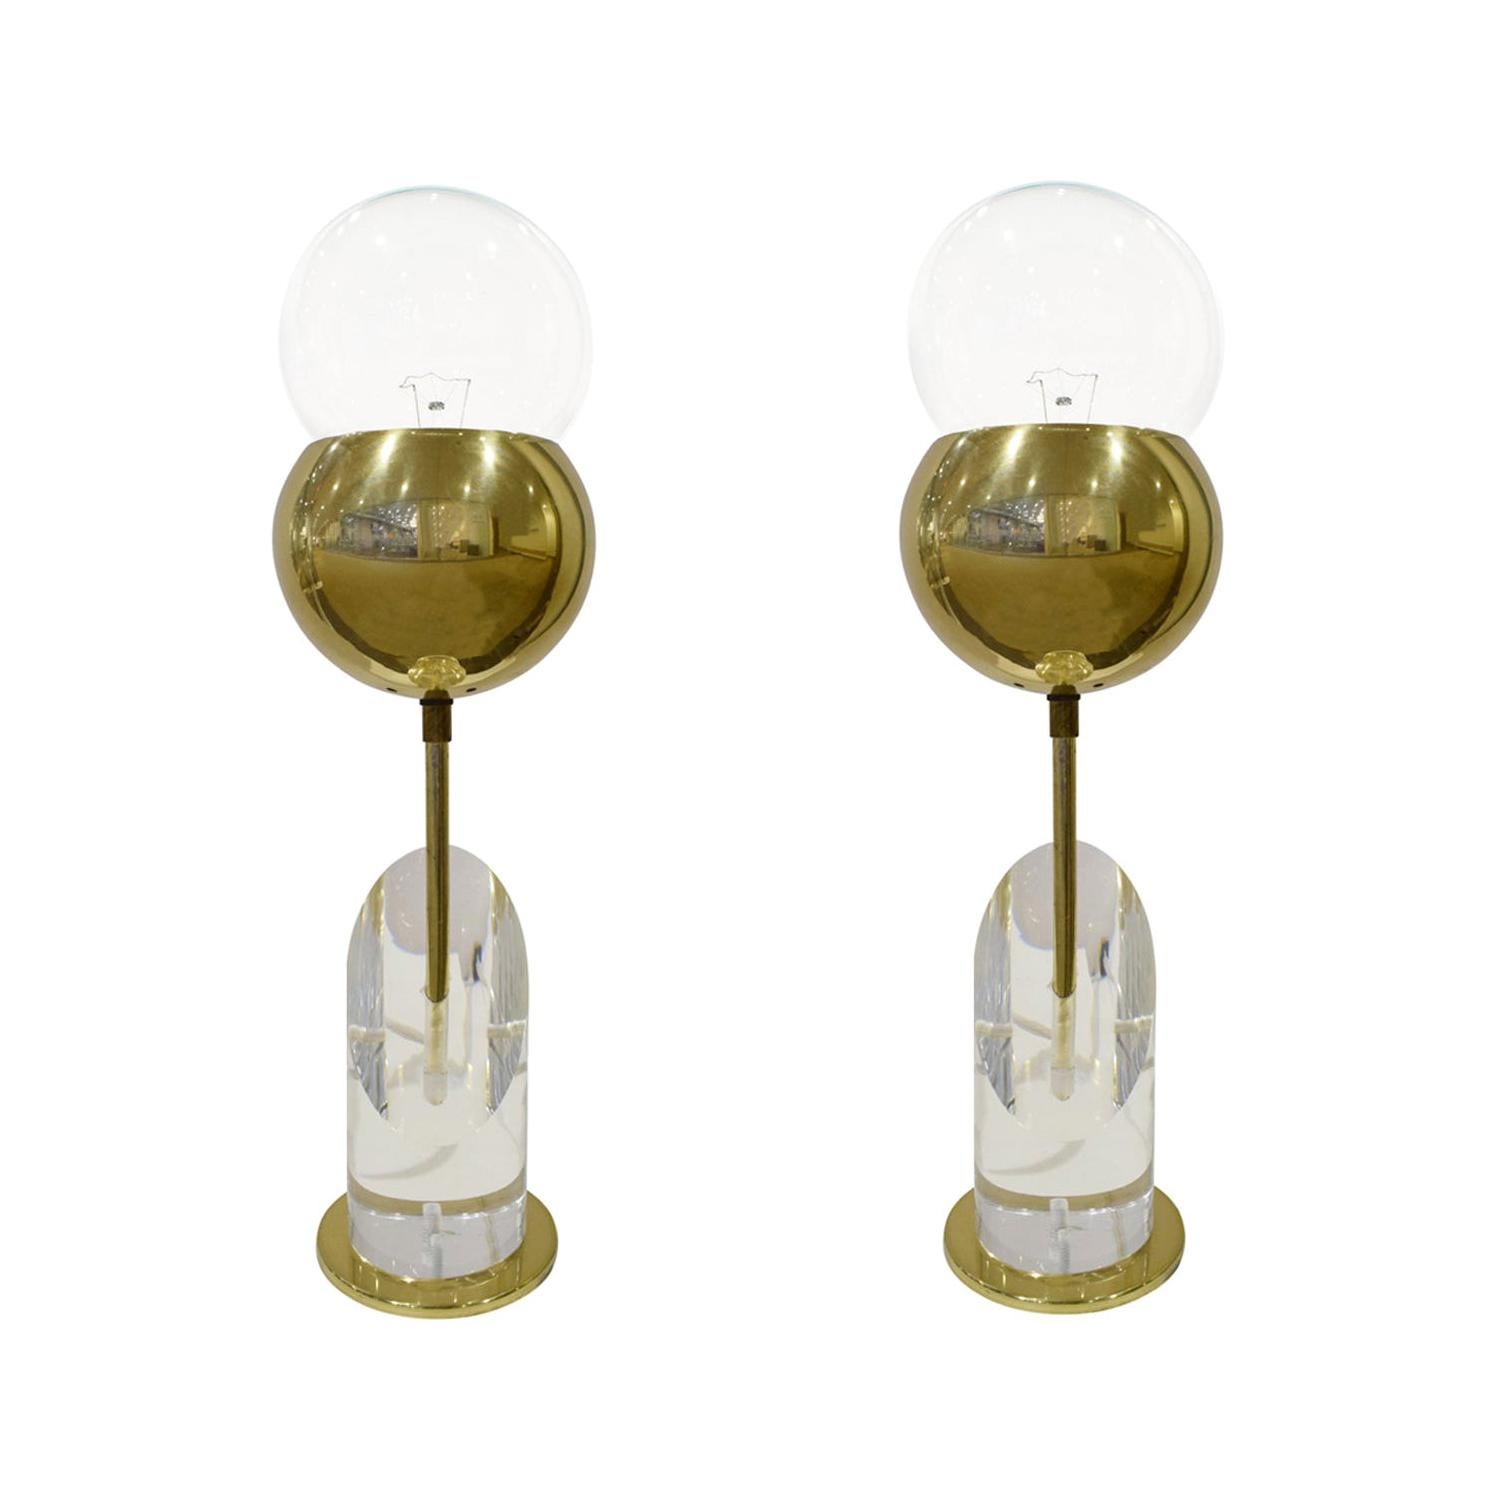 Pair of Sculptural Brass and Lucite Table Lamps, 1970s